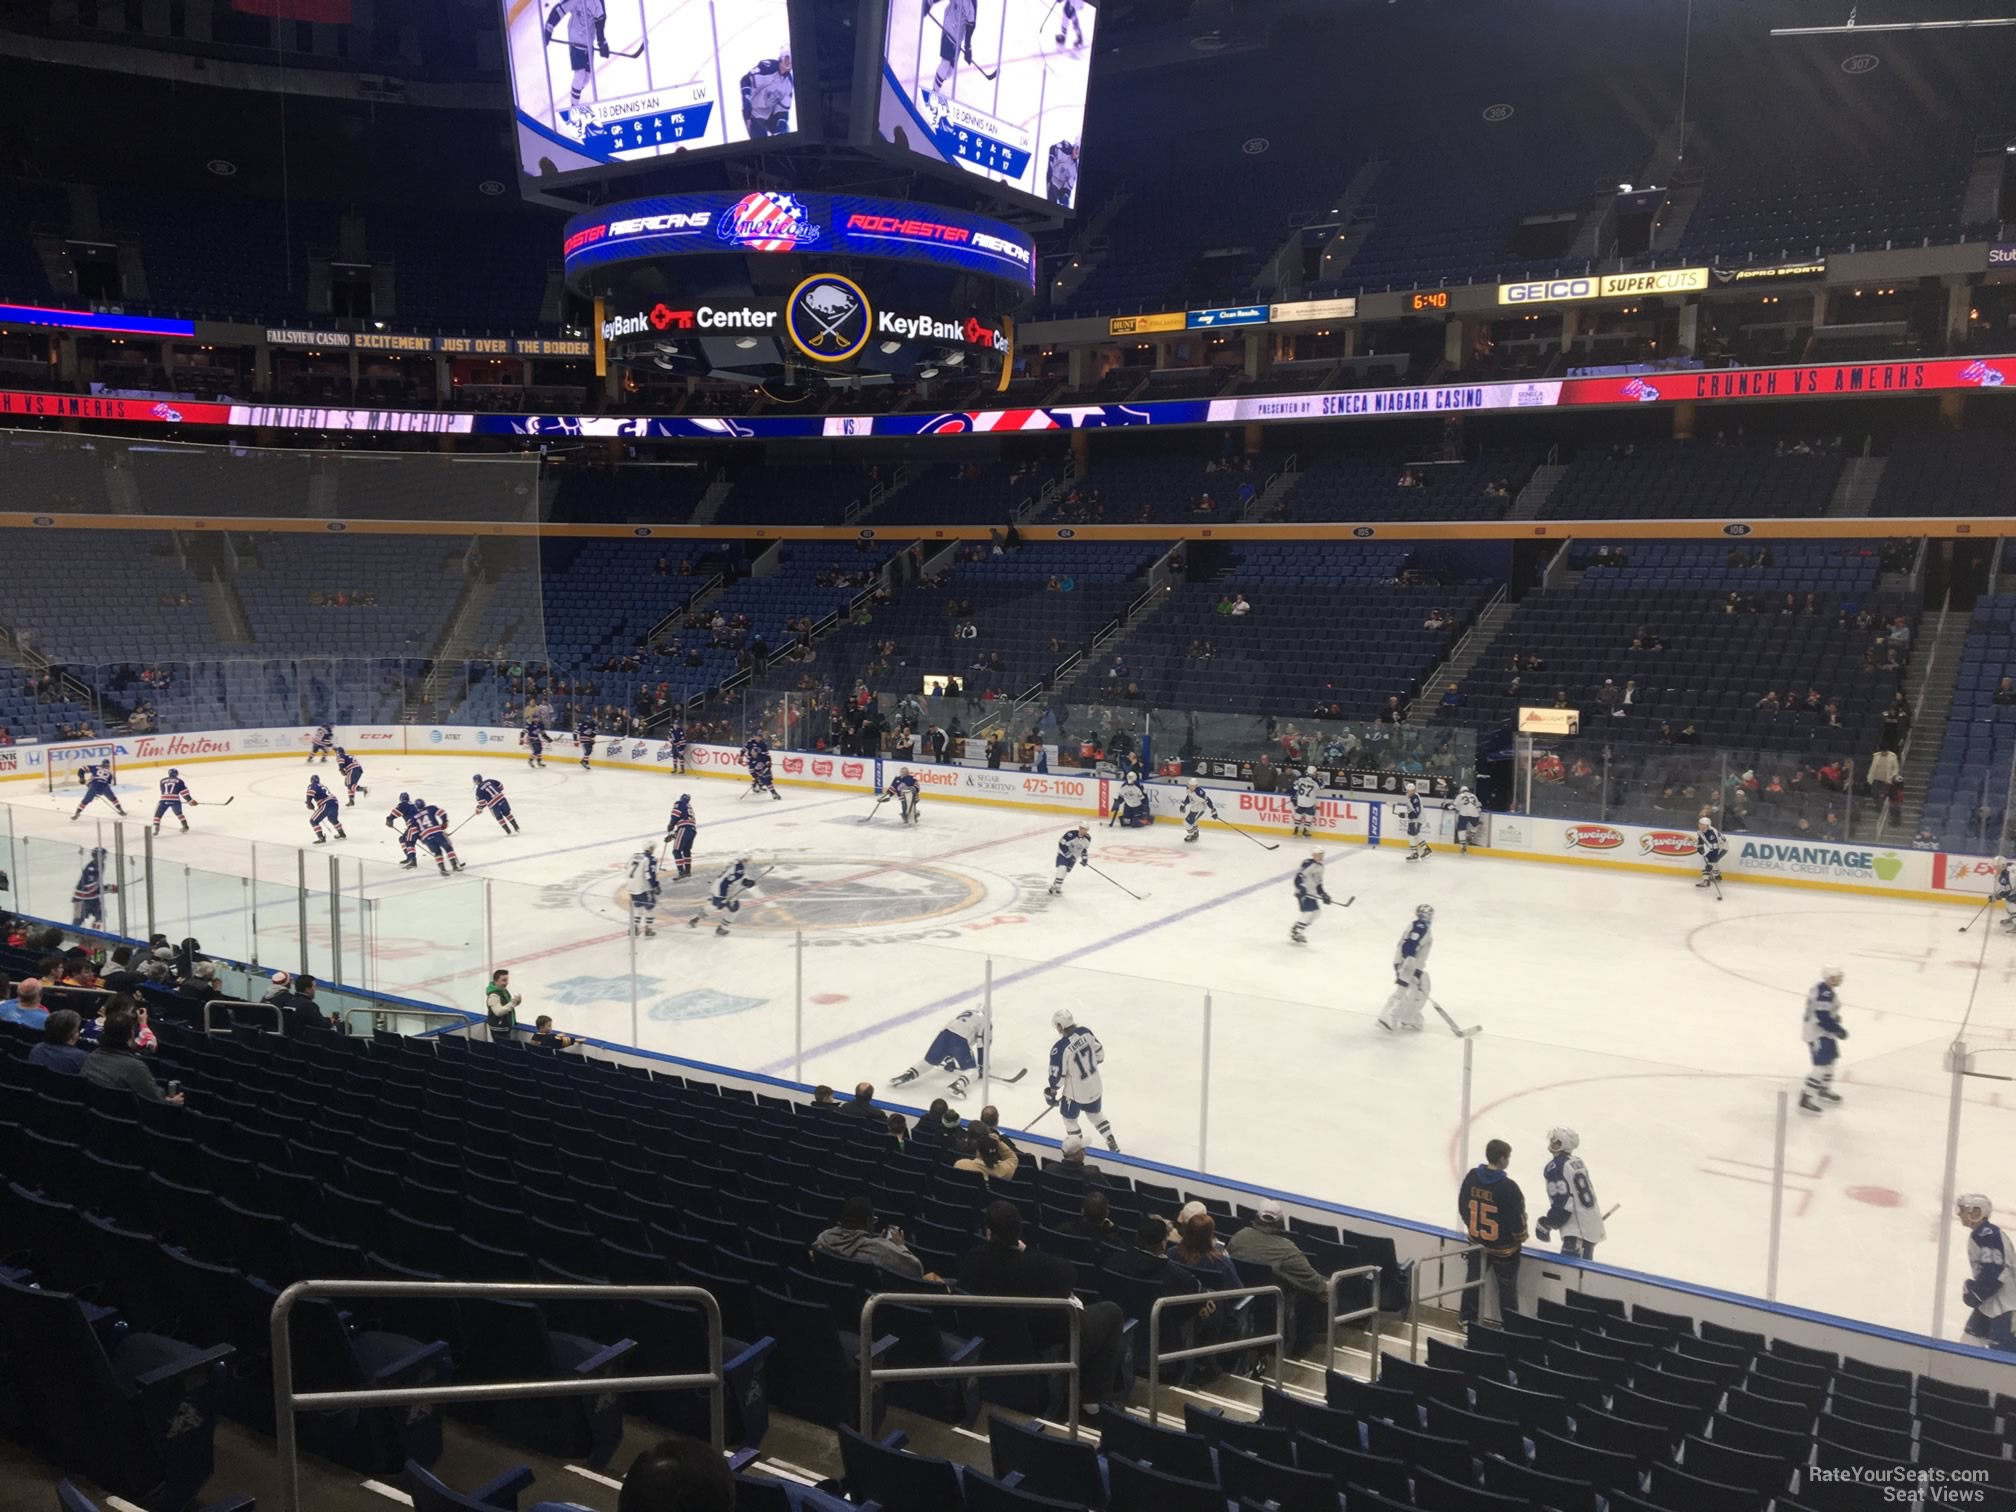 section 115, row 22 seat view  for hockey - keybank center